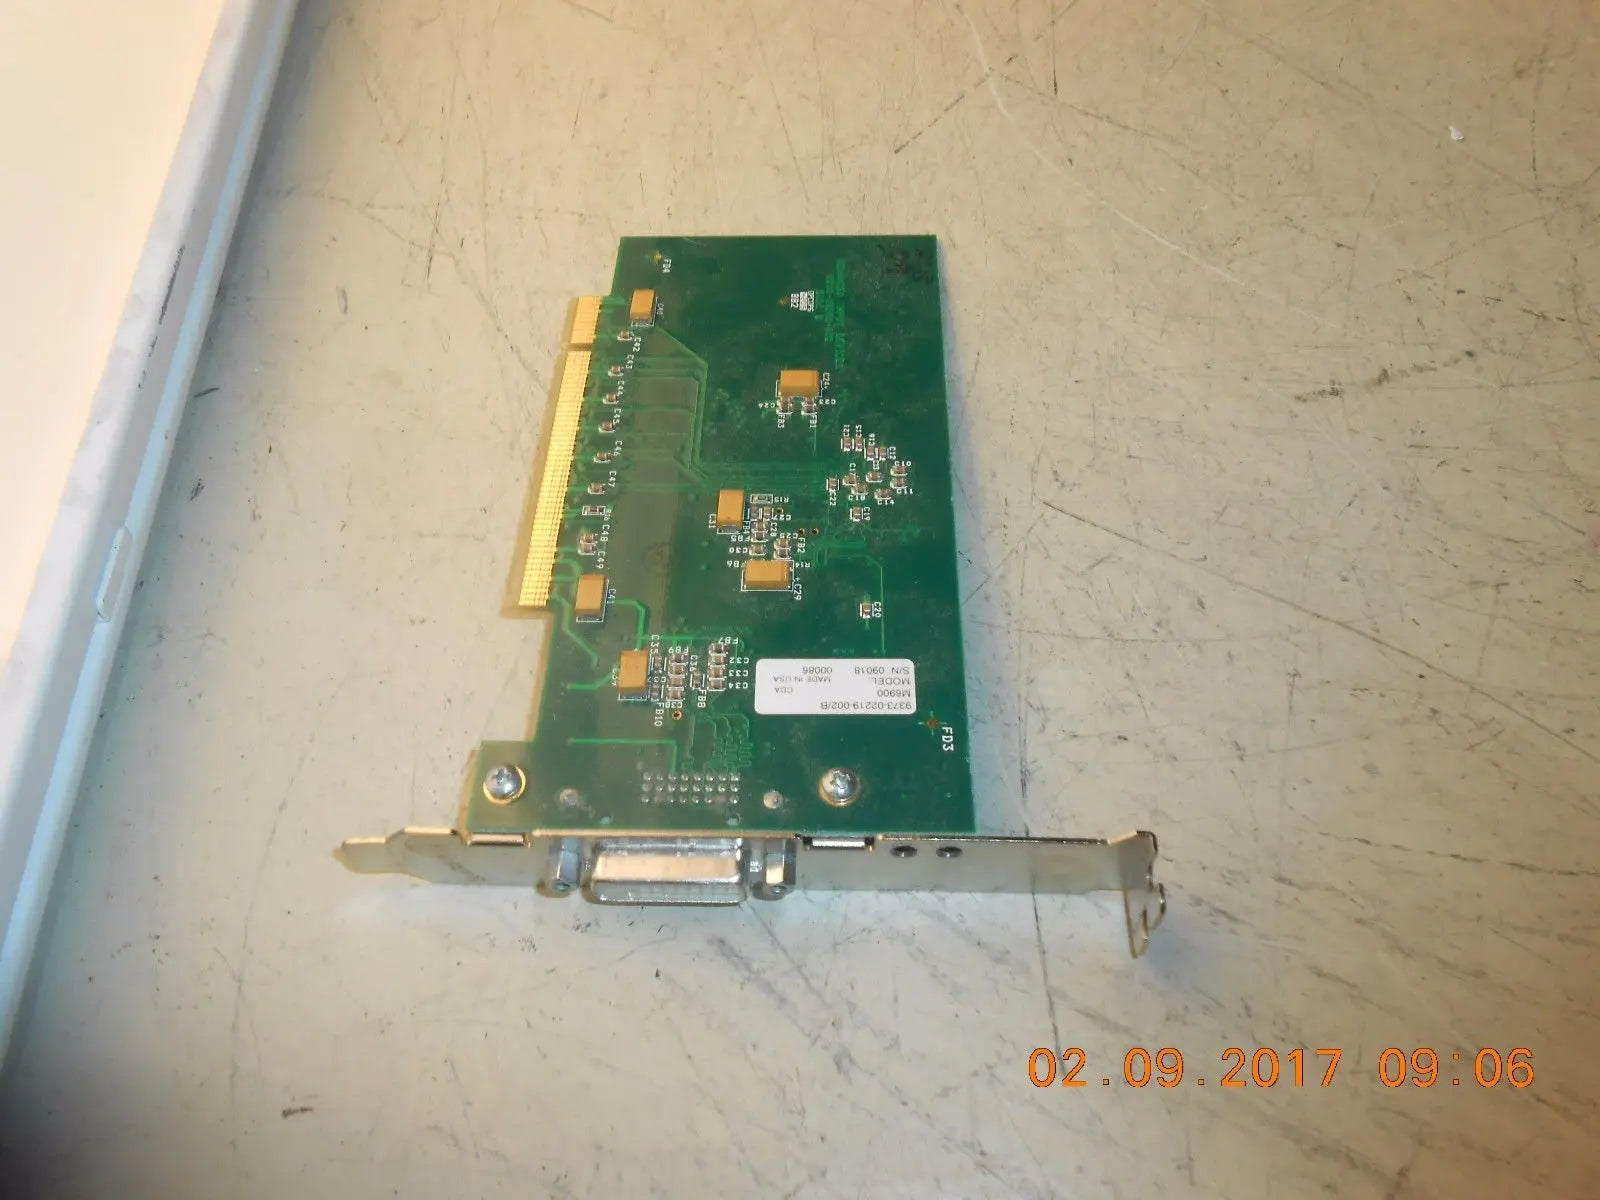 GE Logiq 9 Ultrasound System Card. This item is used DIAGNOSTIC ULTRASOUND MACHINES FOR SALE